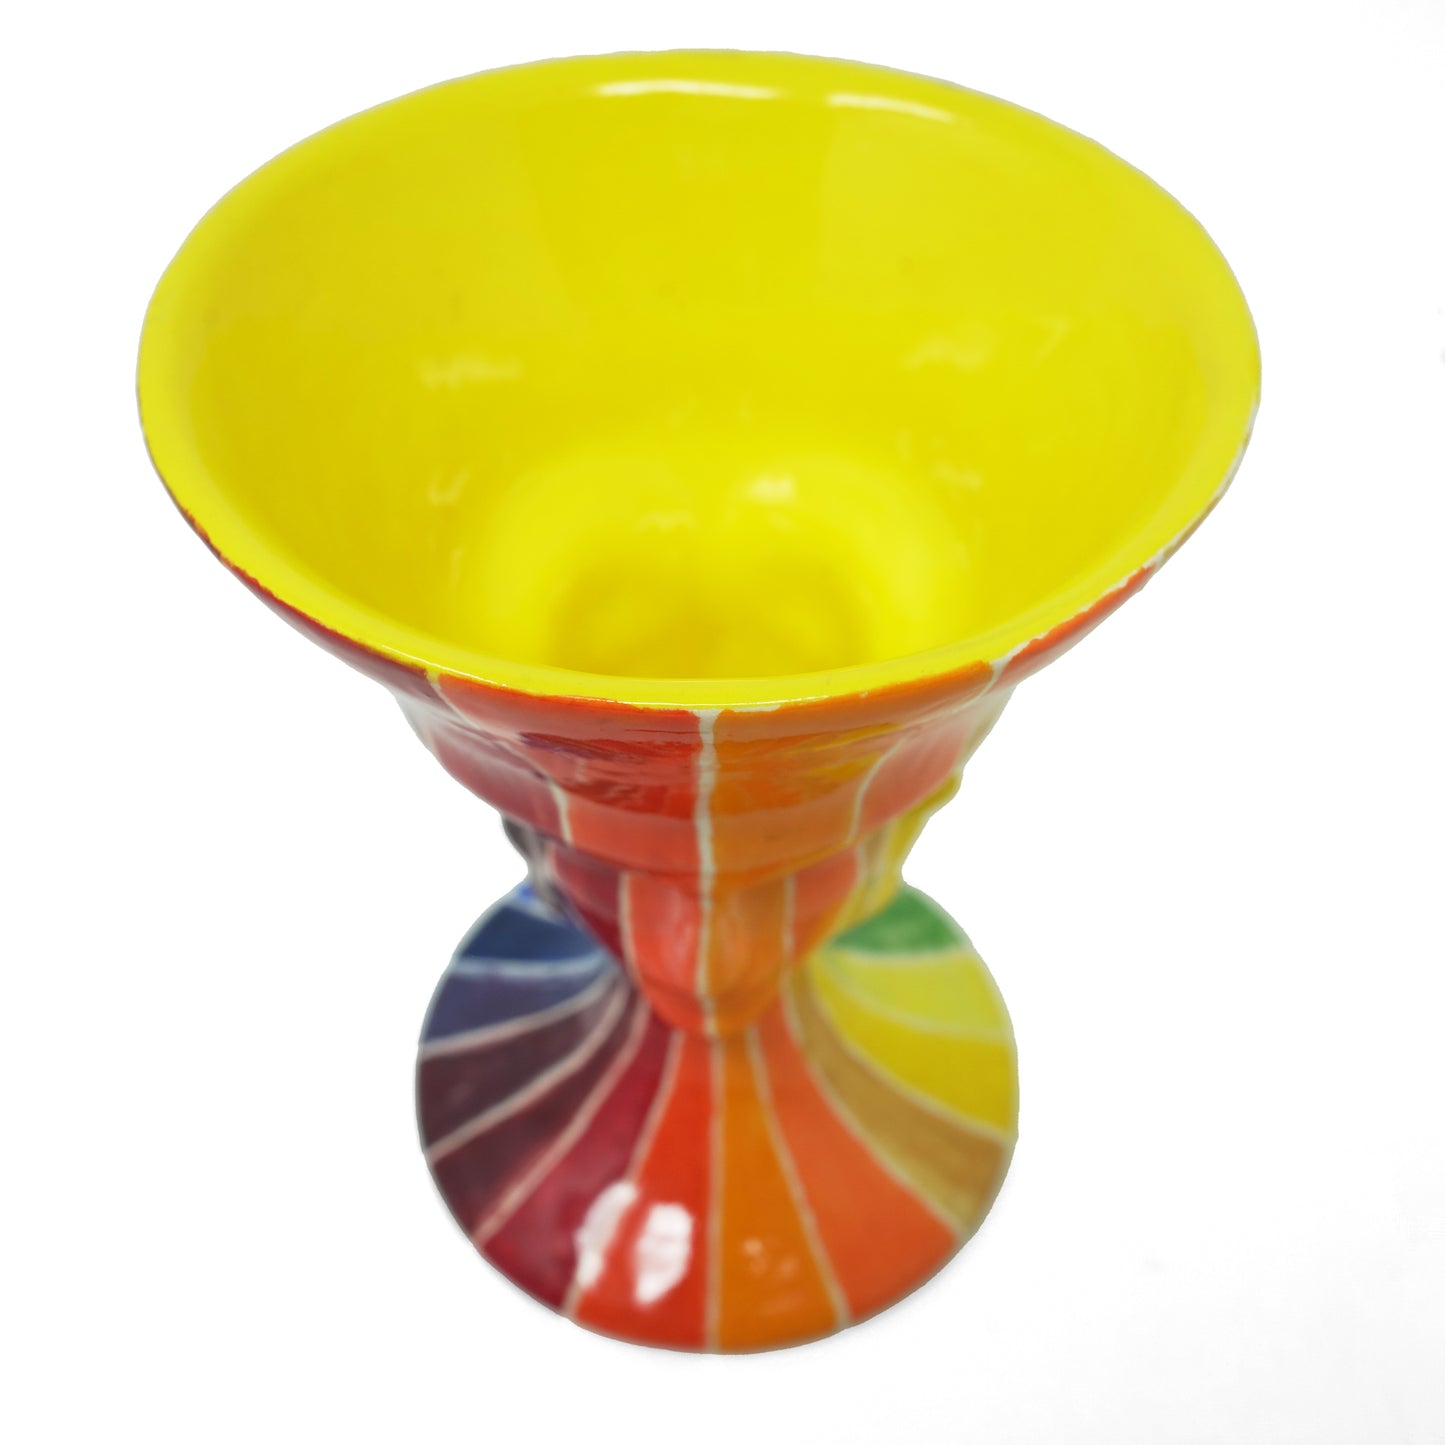 Spectral with Yellow Interior - Ceramic Grail